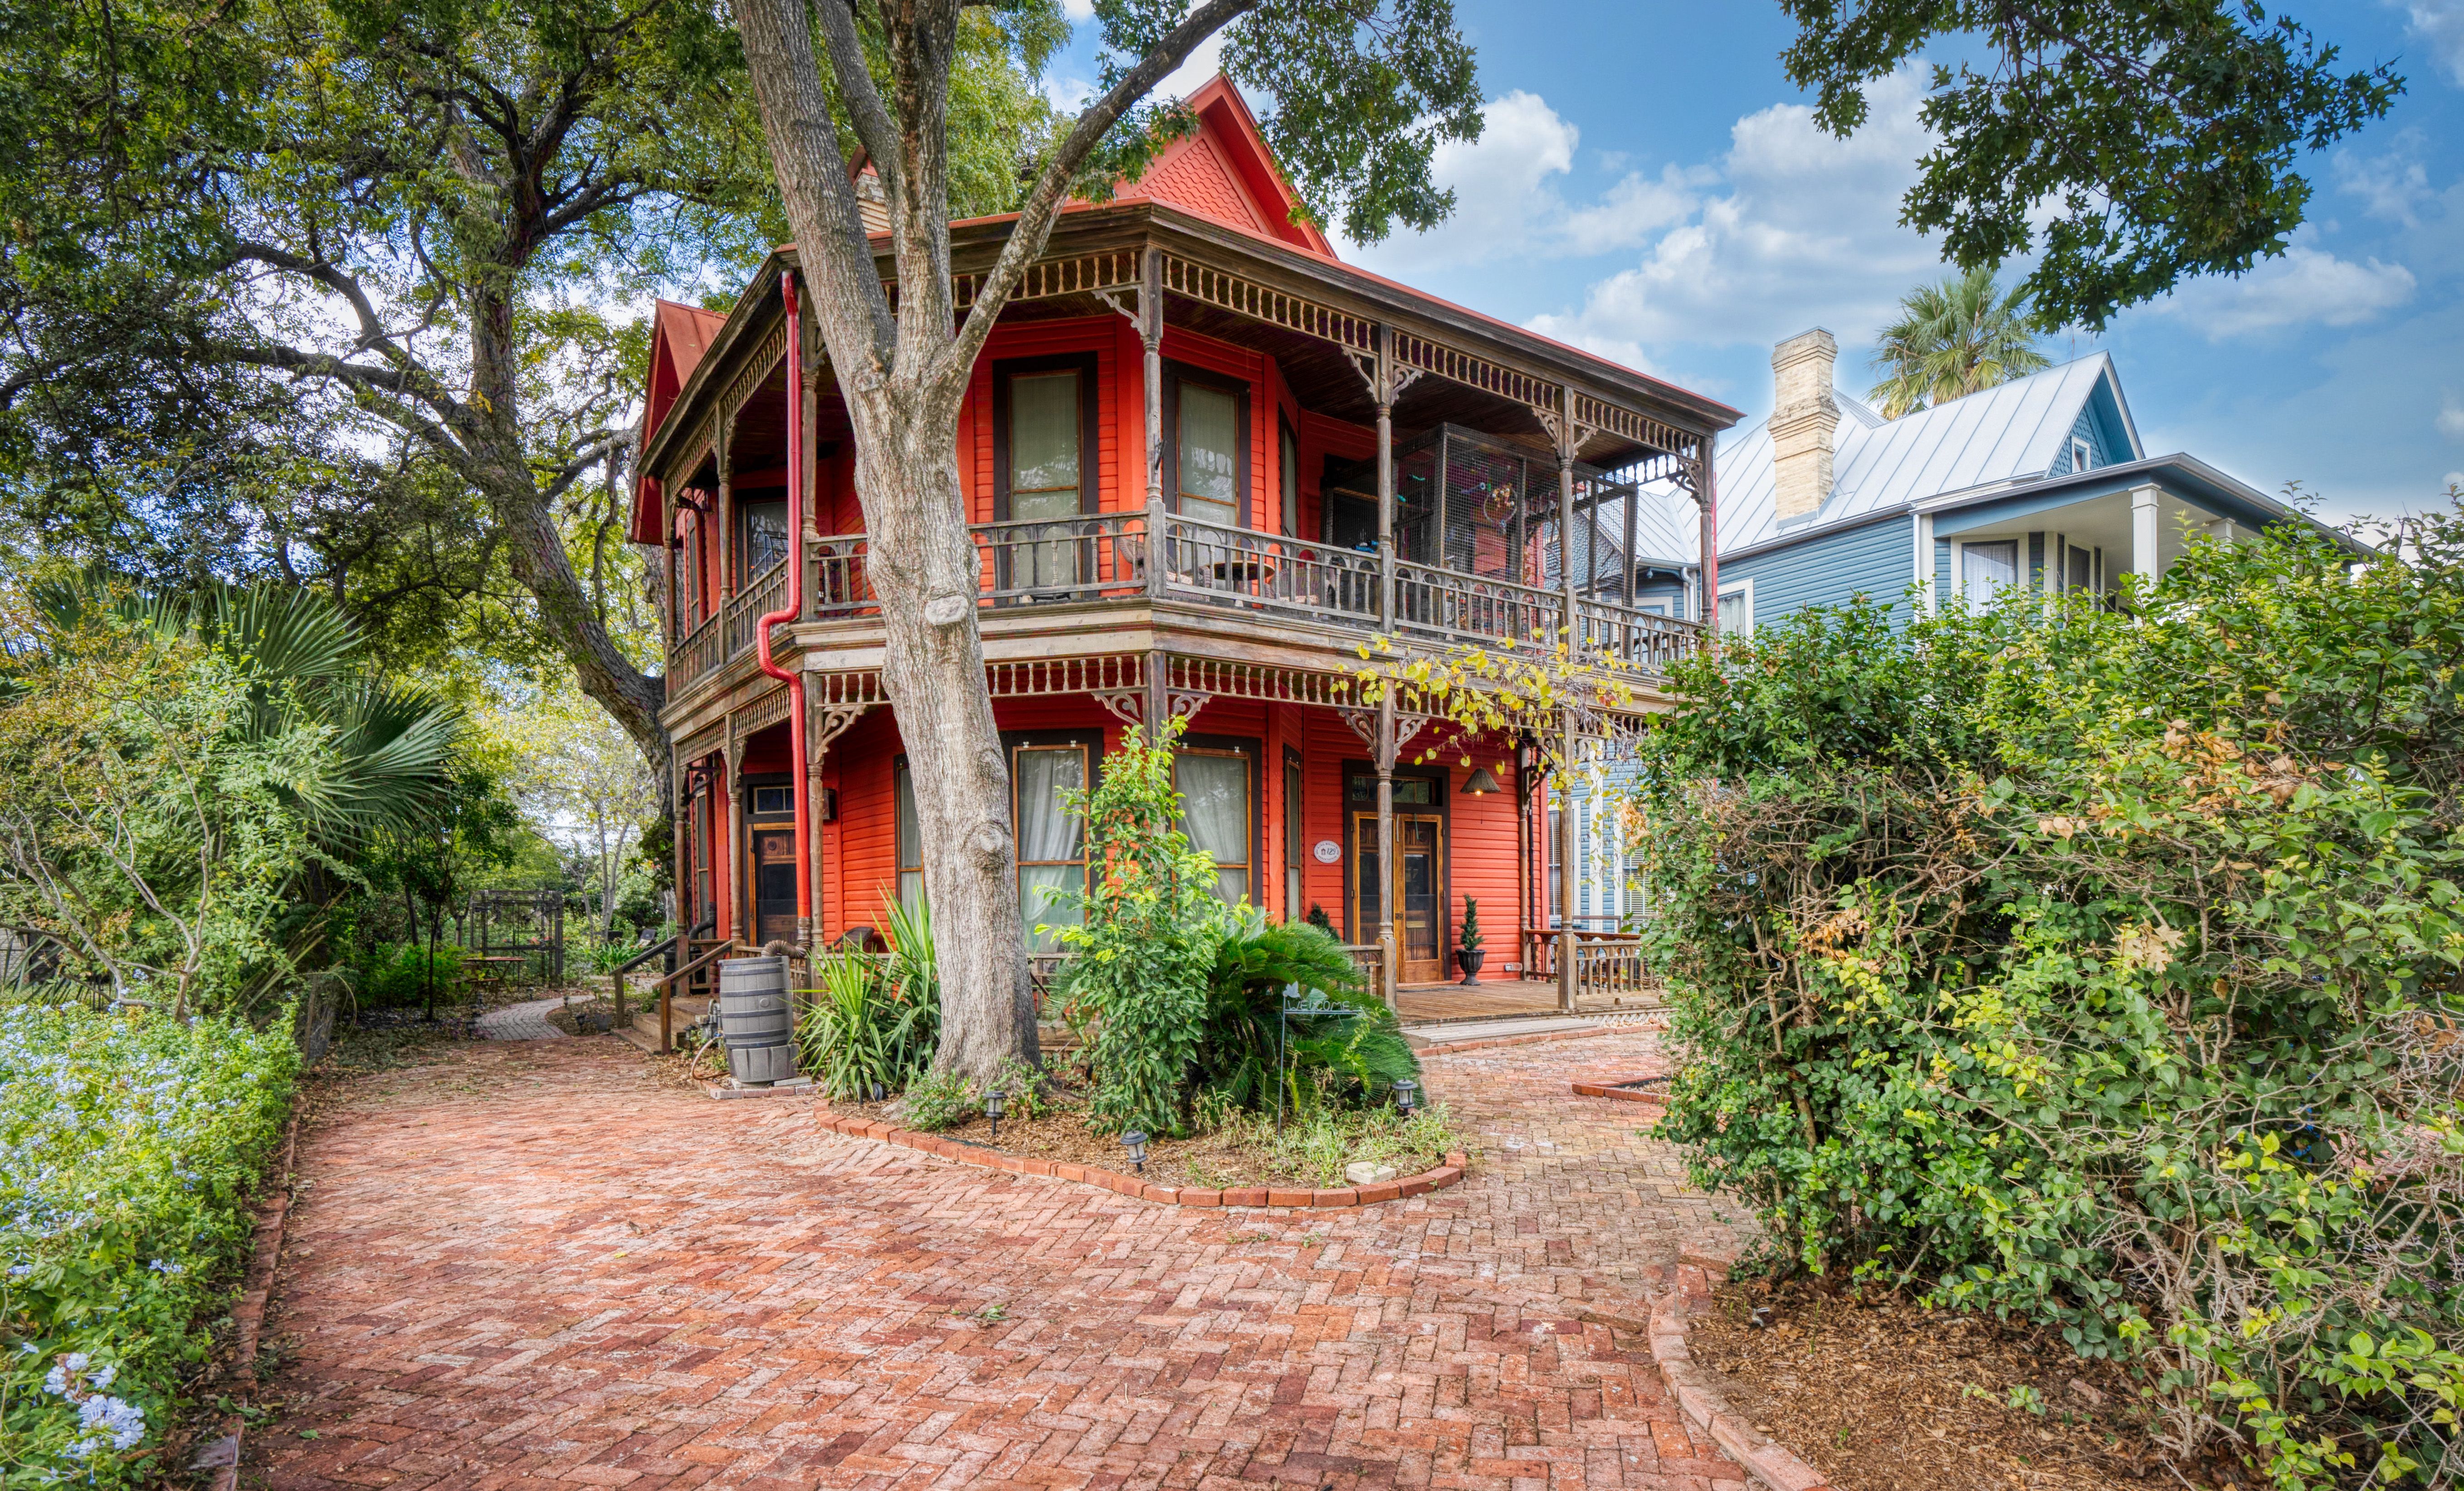 A bright red, historic looking home for sale in the King William neighborhood of Southtown, San Antonio. The home is surrounded by brick pavers and trees.